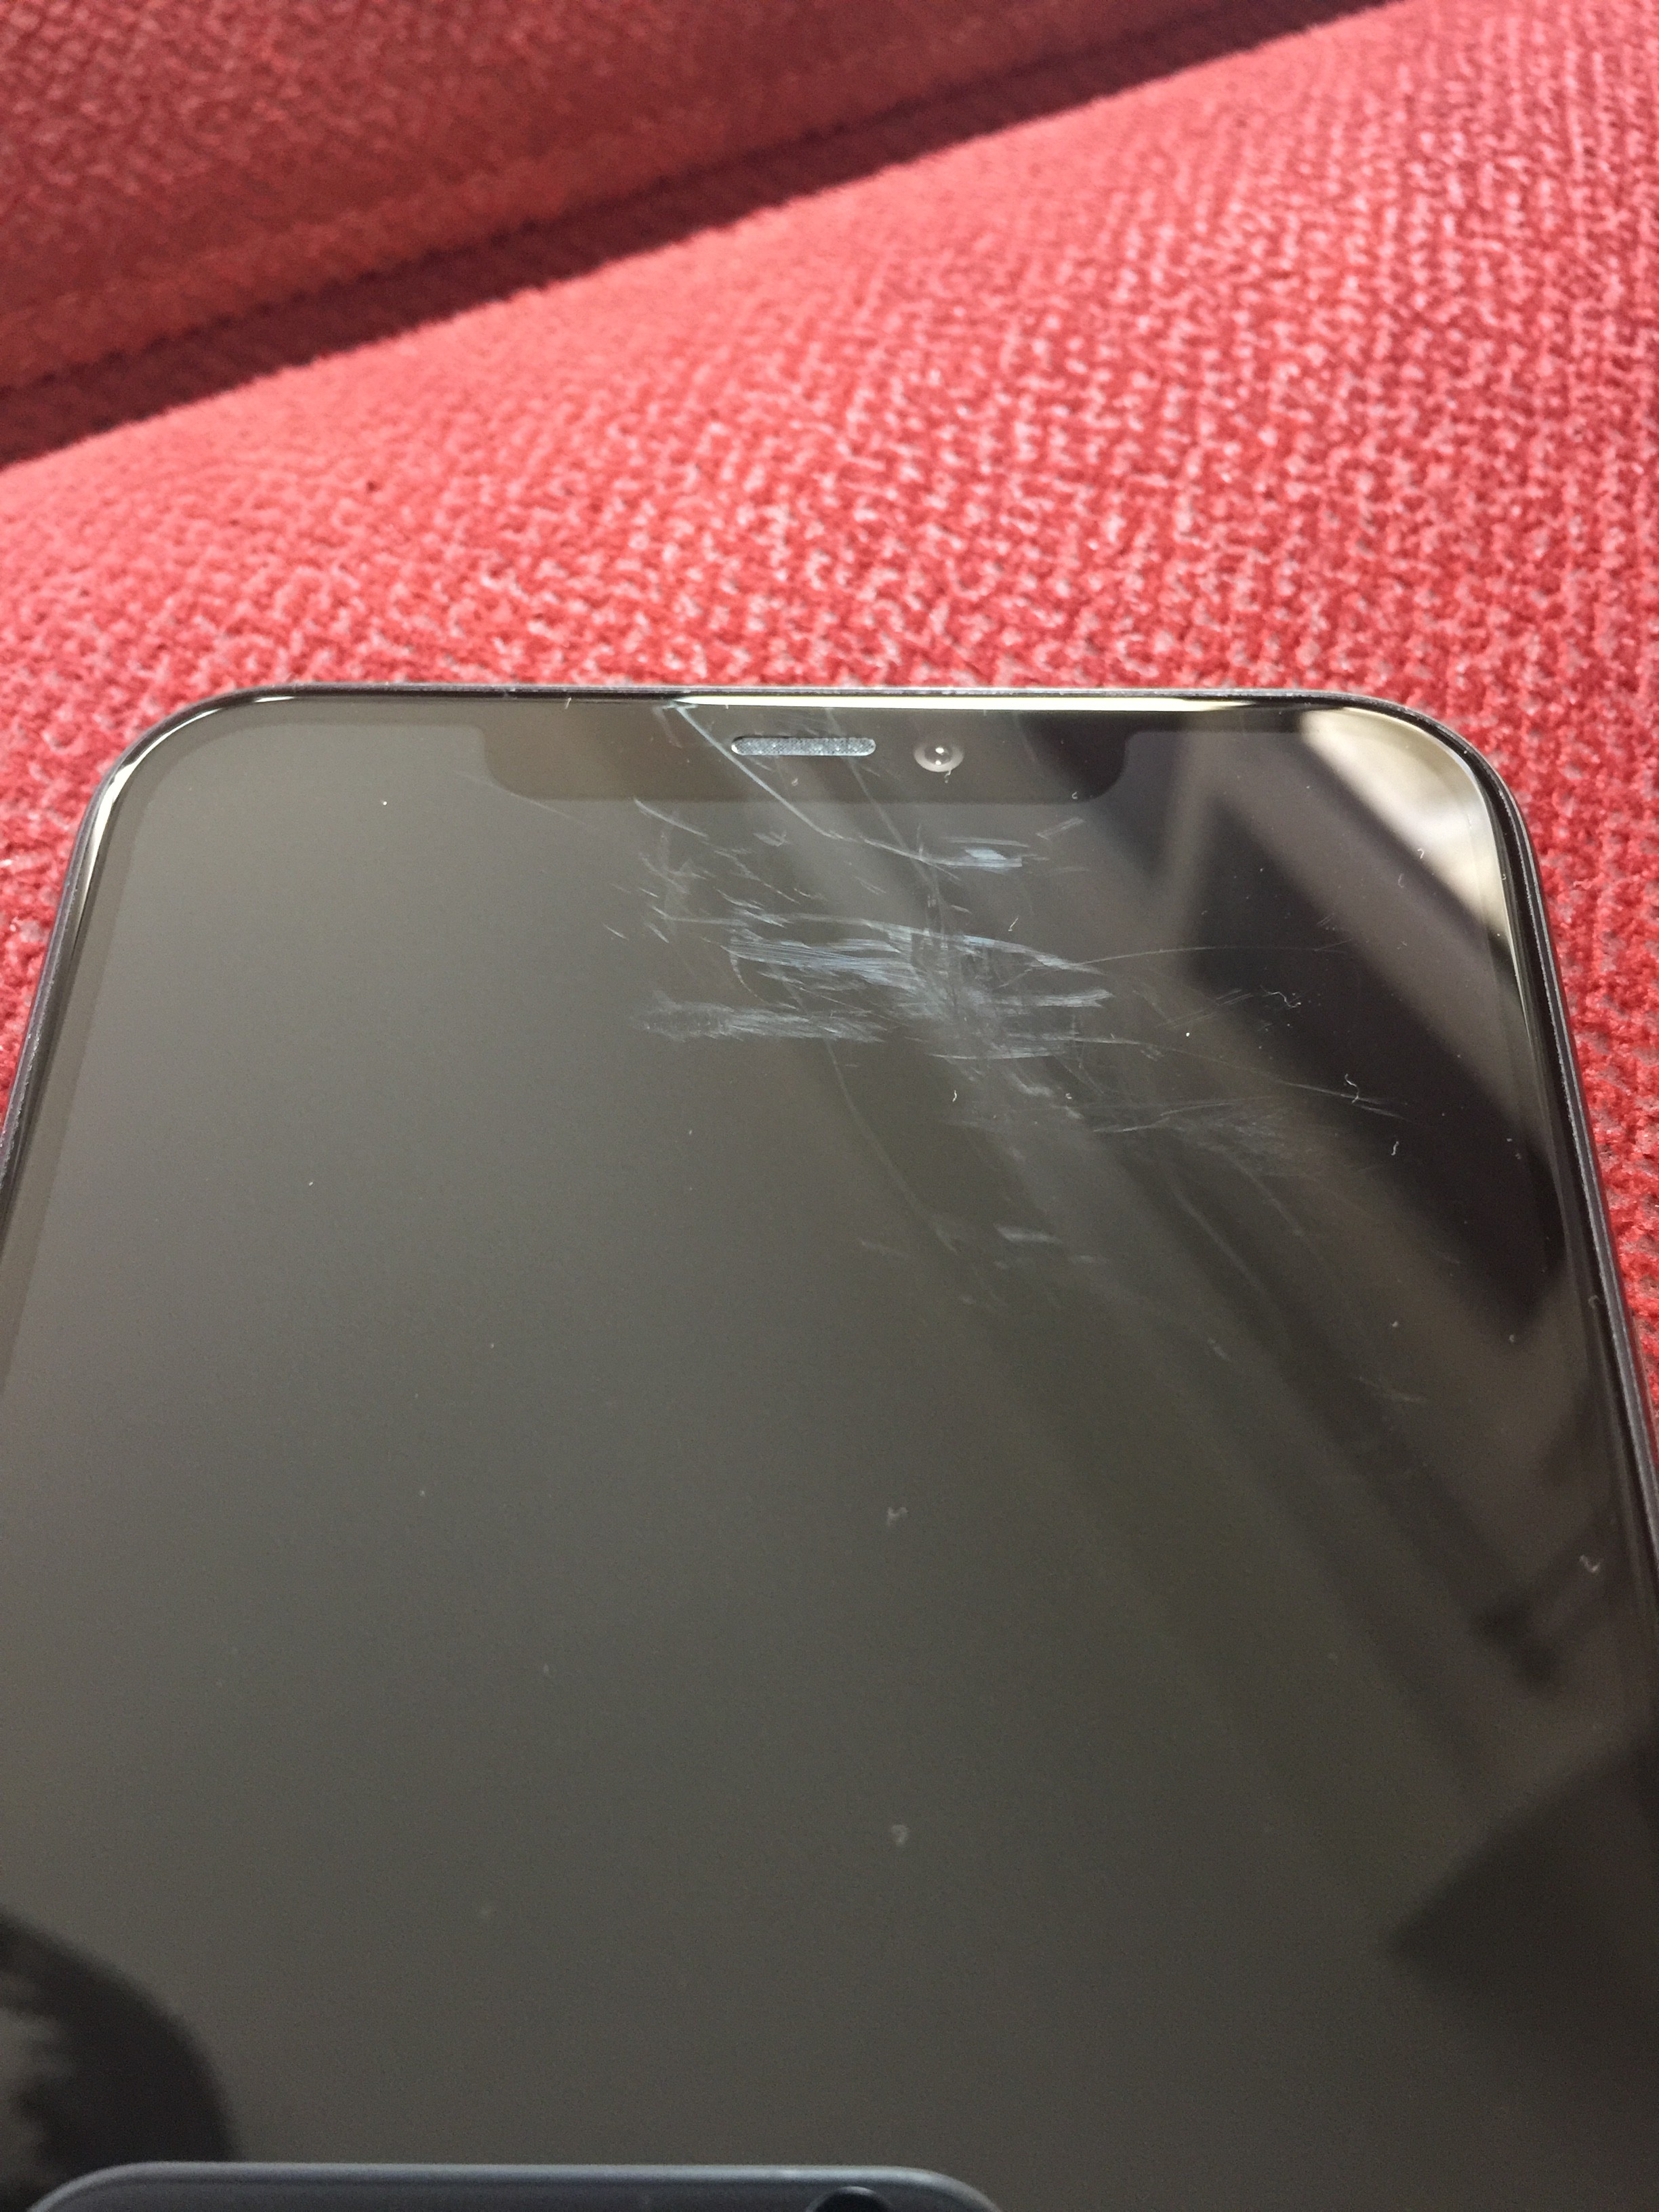 My iPhone 11 has 4 deep scratches on the screen. I don't know why.